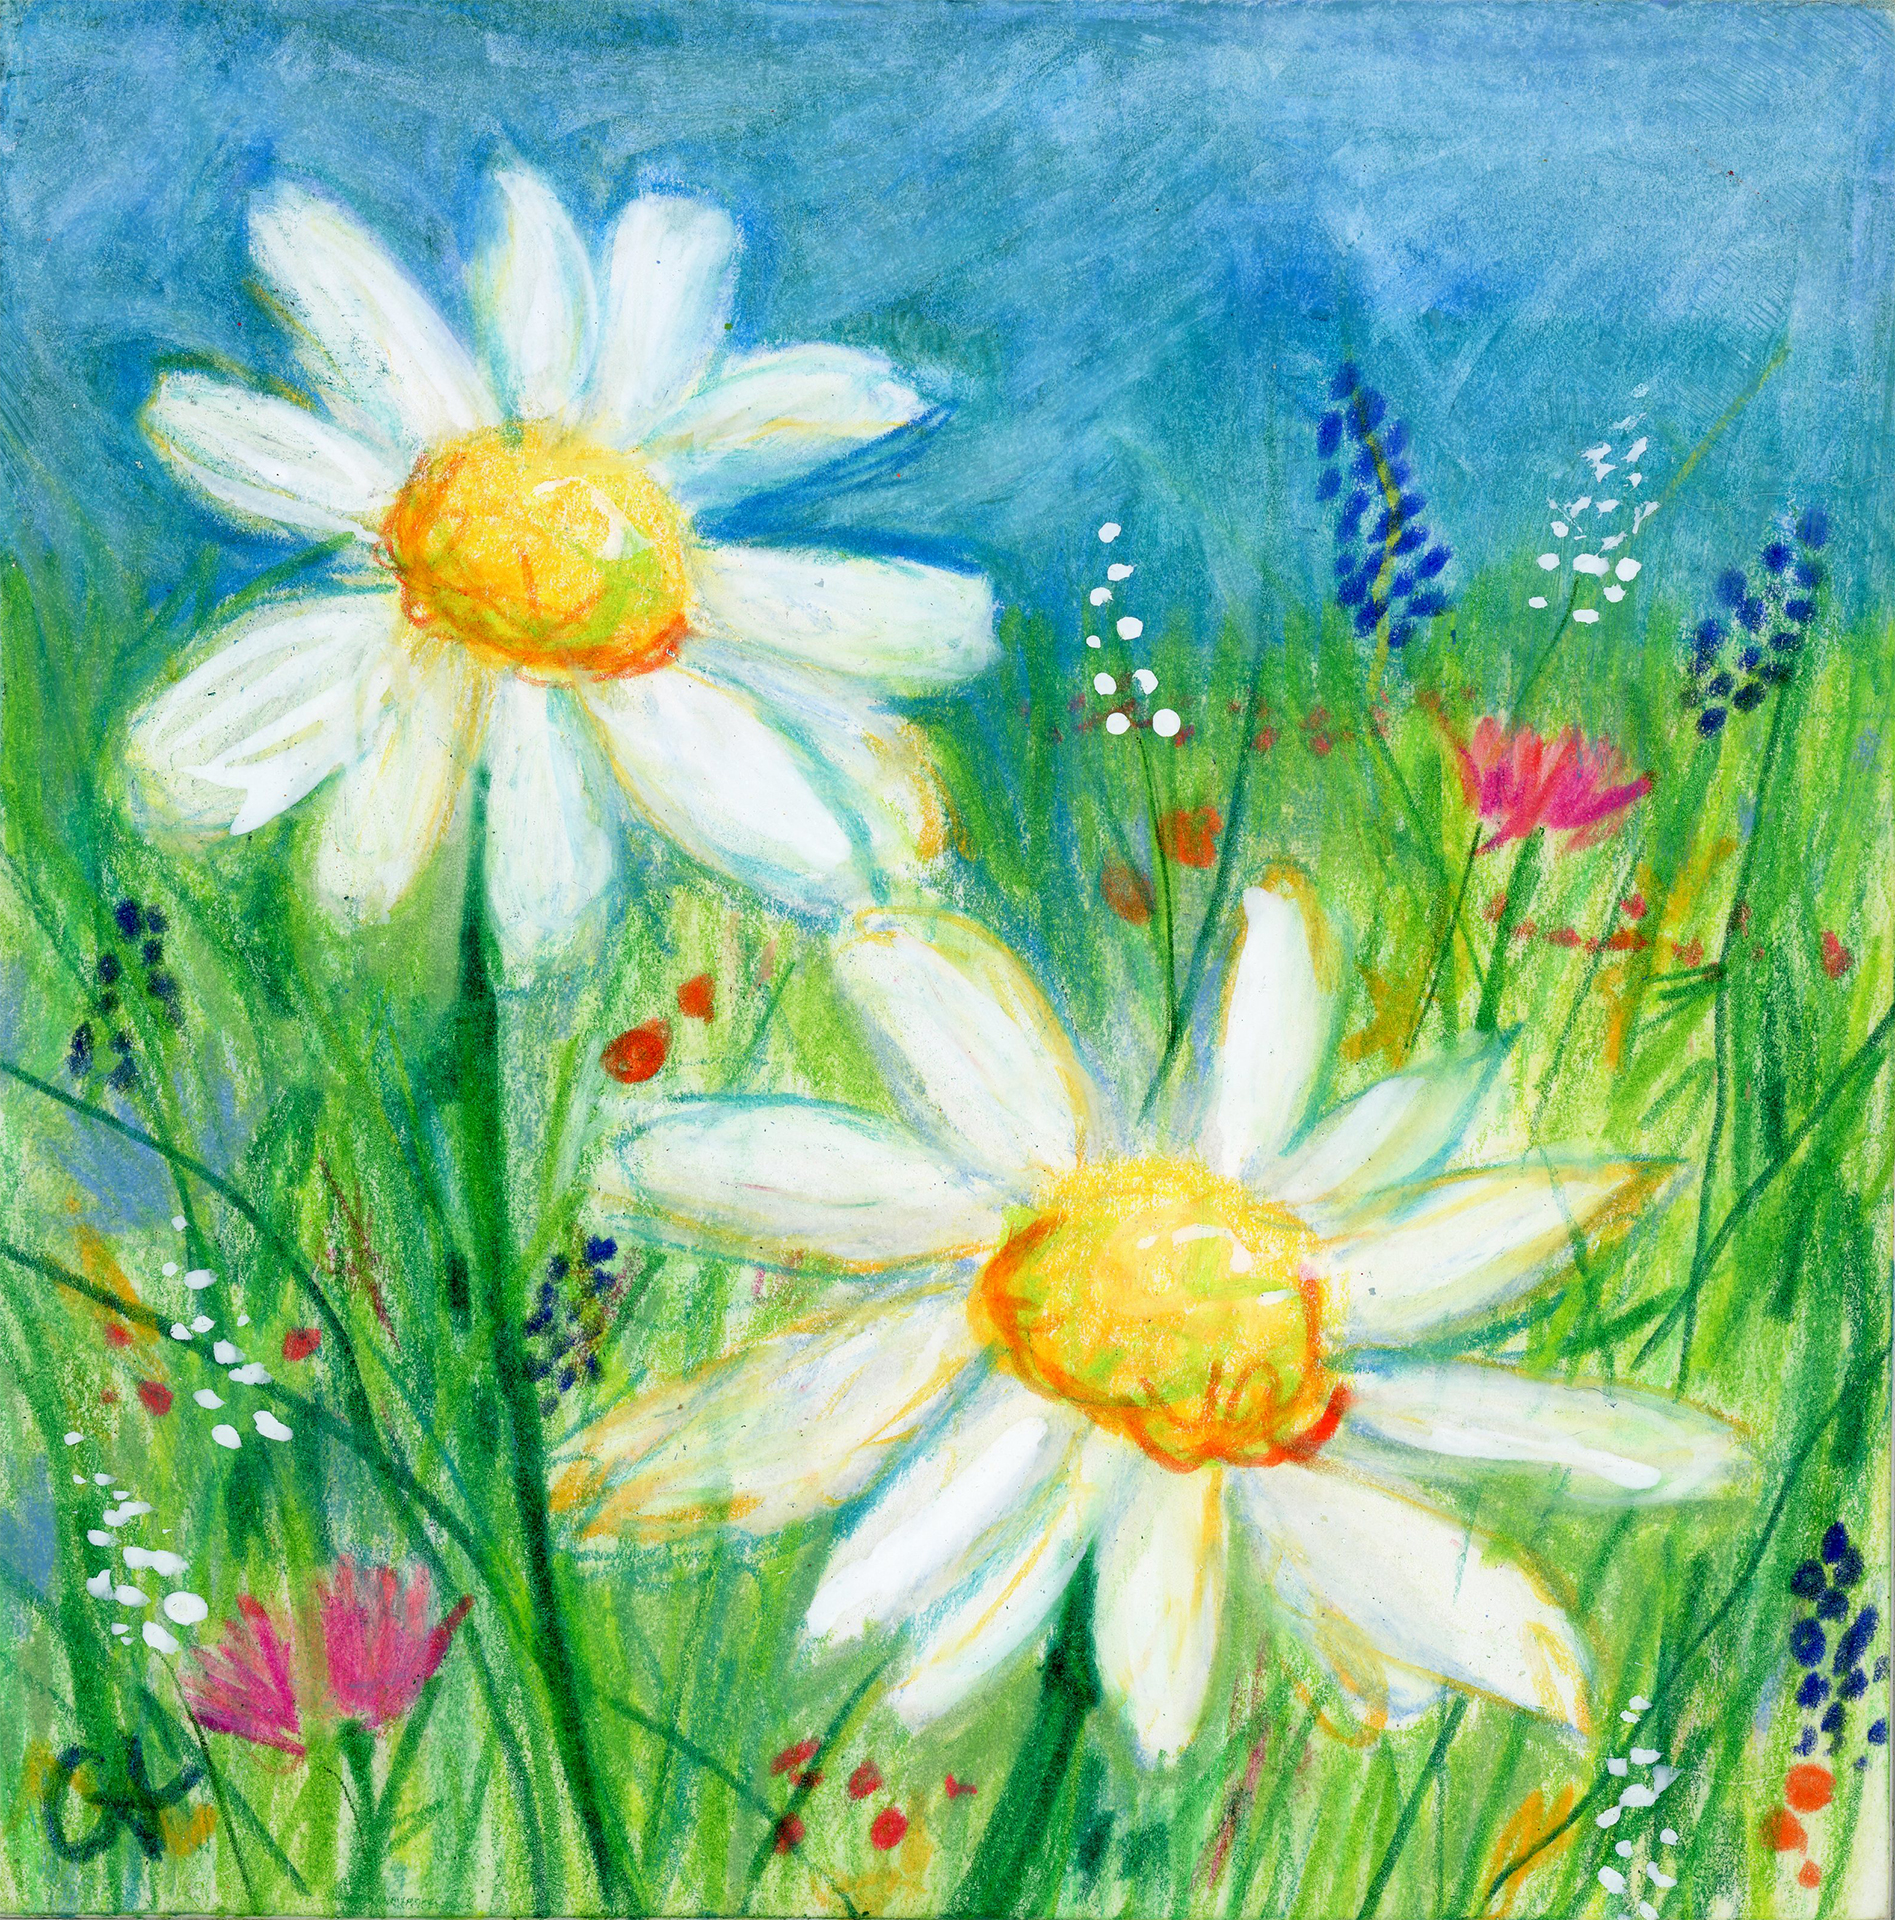 SOLD - "Wildflowers #1", 4" x 4", mixed media